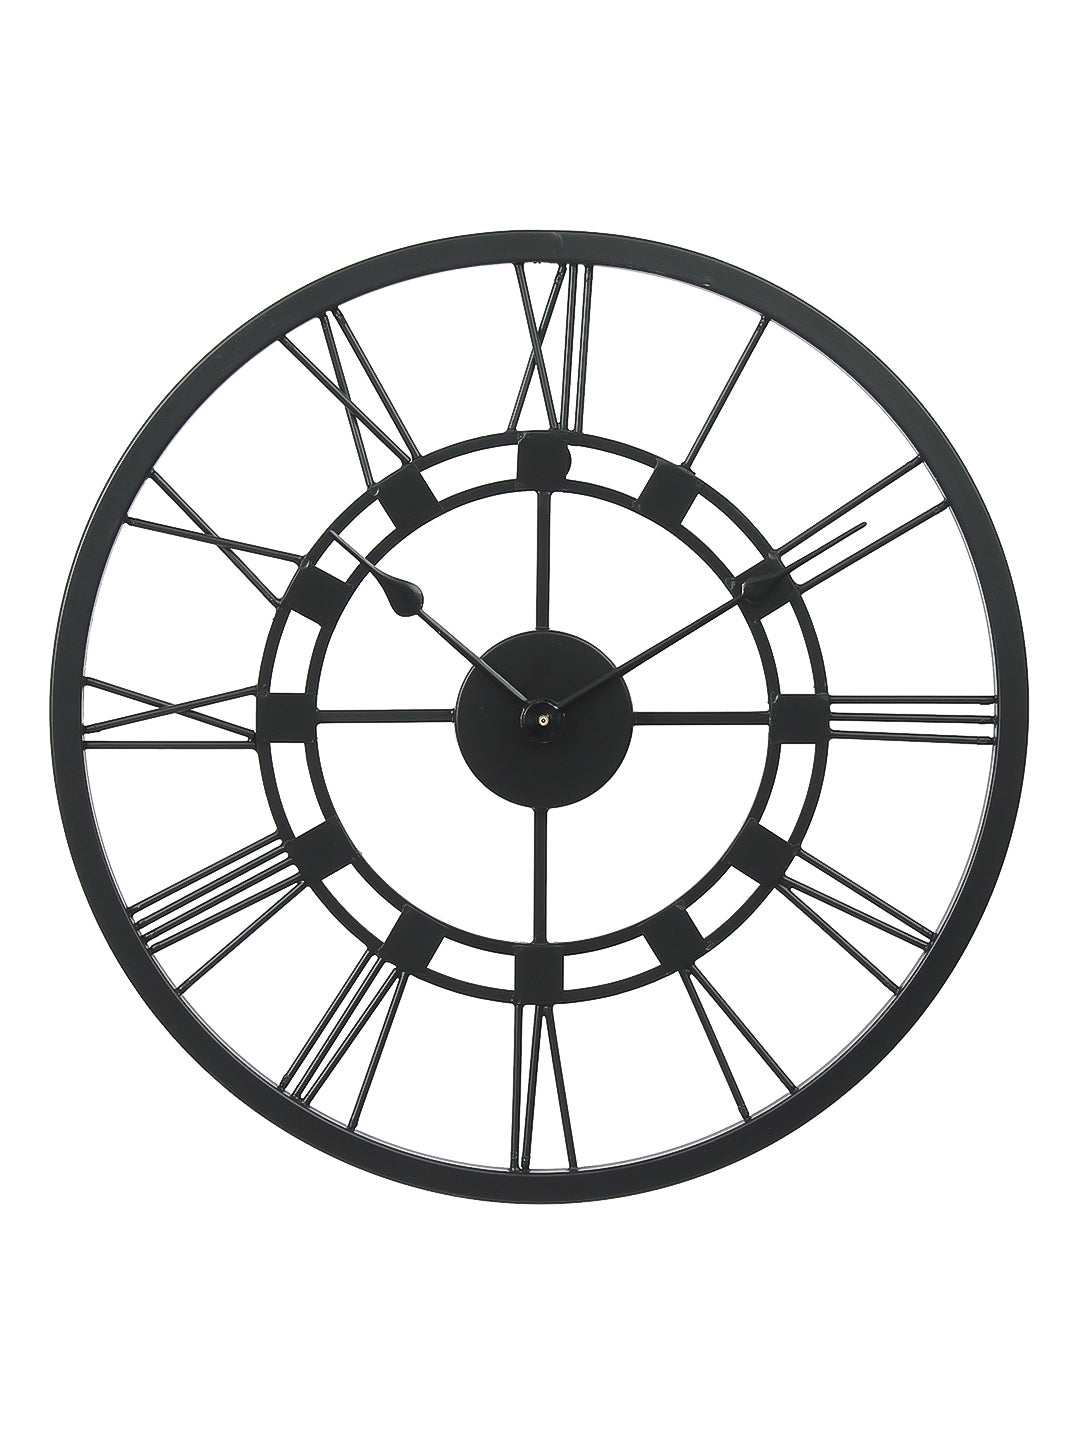 Black Iron Round Handcrafted Analog Roman Number Wall Clock Without Glass